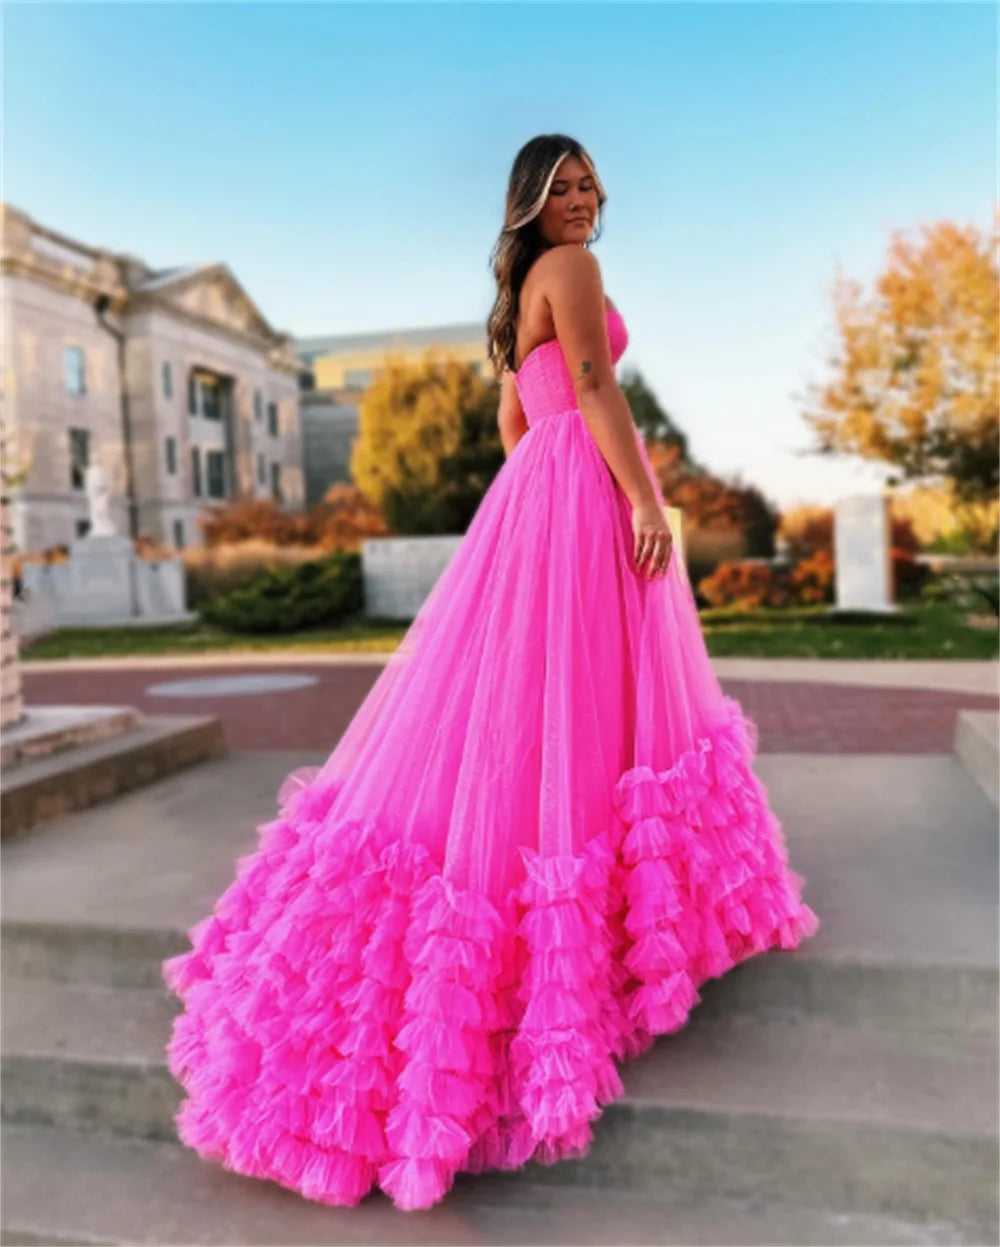 Strapless Hot Pink Evening Dress Princess Puffy A-line Party Dress Tulle Sweep Tail Multi layer Dress The Clothing Company Sydney